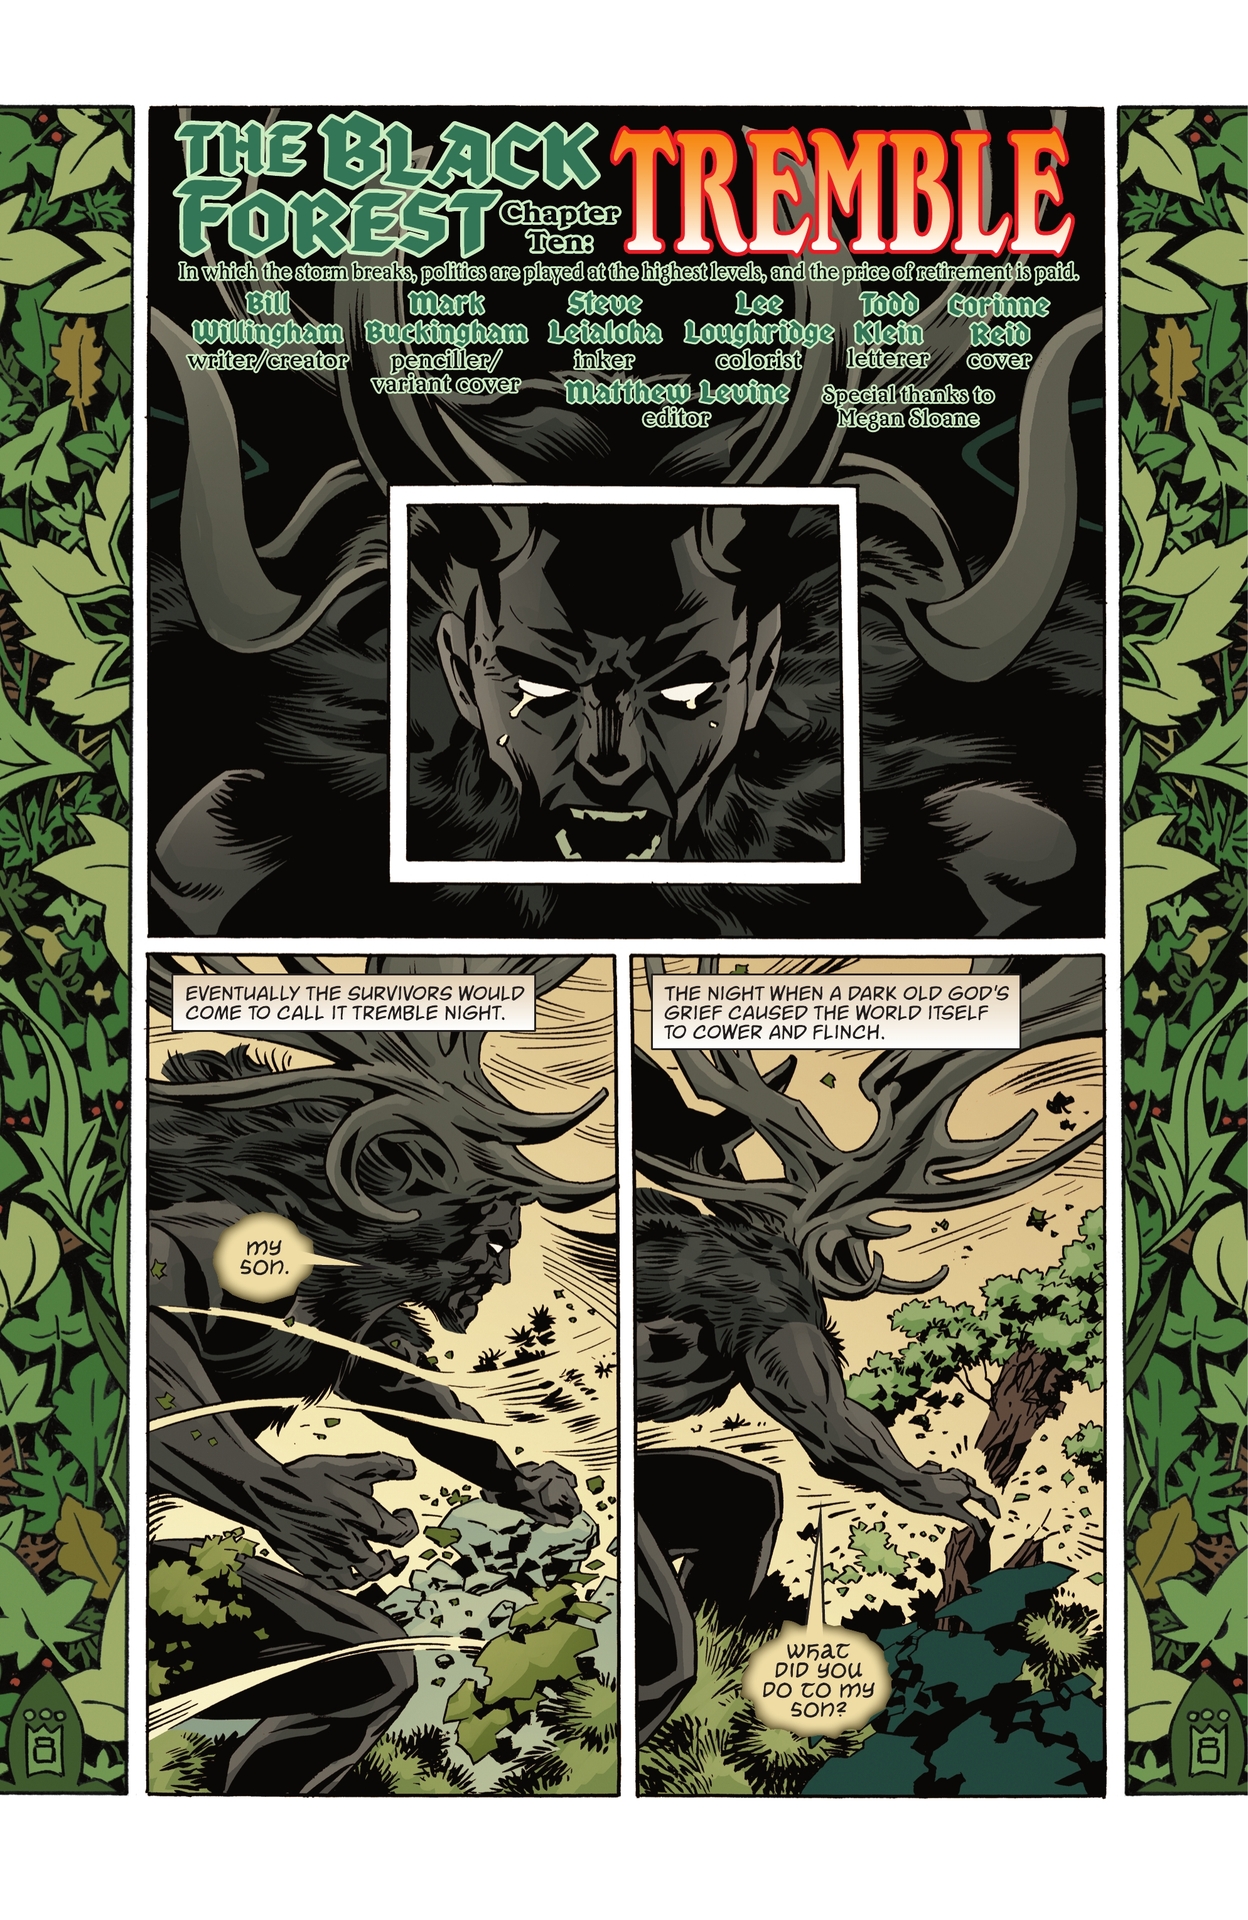 Fables (2002-): Chapter 160 - Page 3